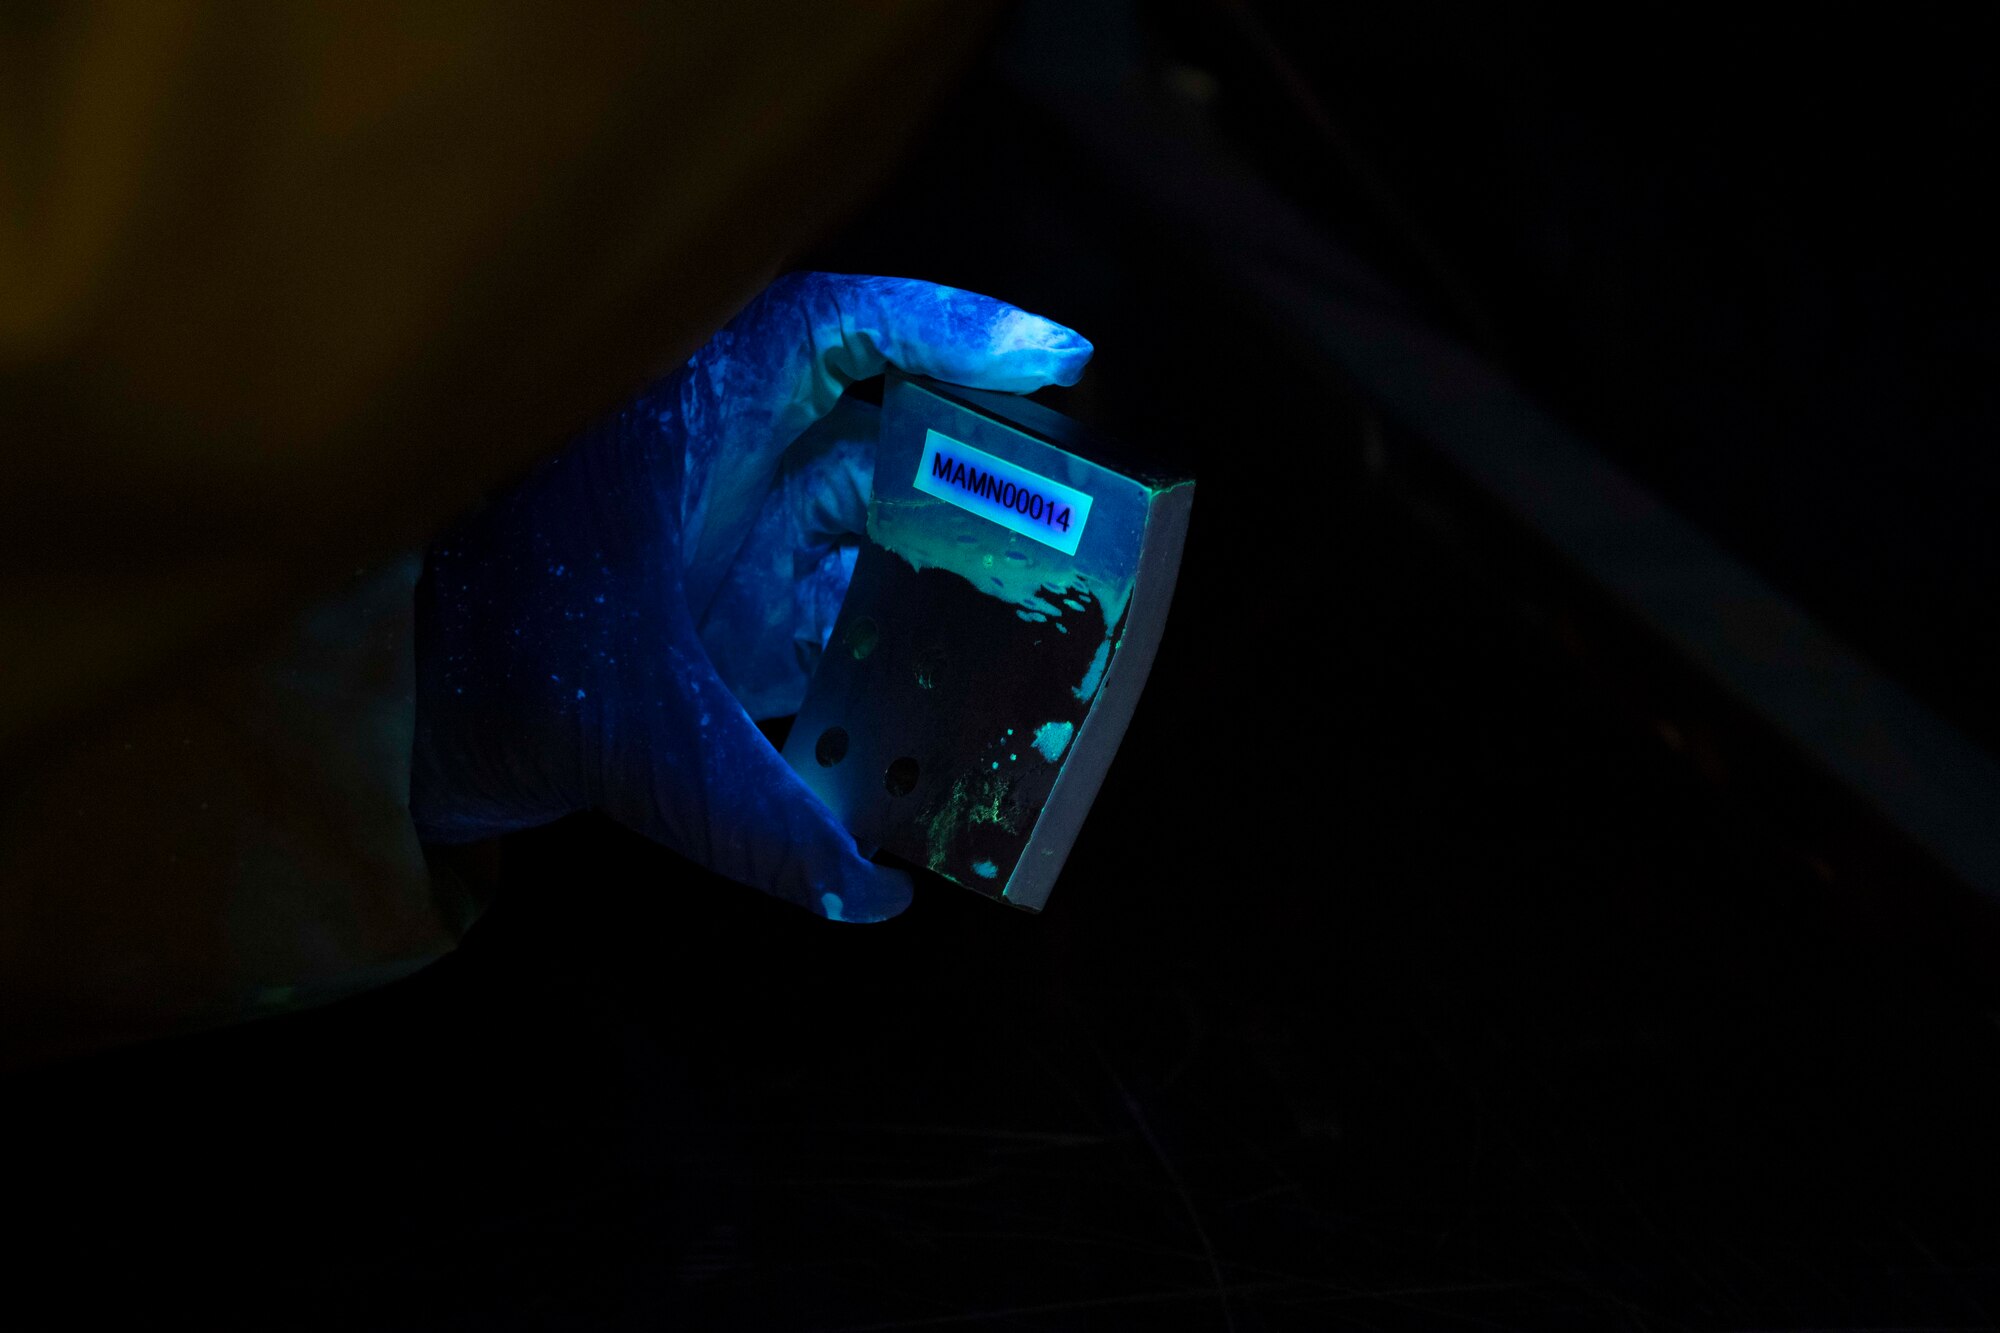 A maintainer with the 6th Maintenance Squadron nondestructive inspections (NDI) unit examines an aircraft part at MacDill Air Force Base, Florida, June 4, 2021.